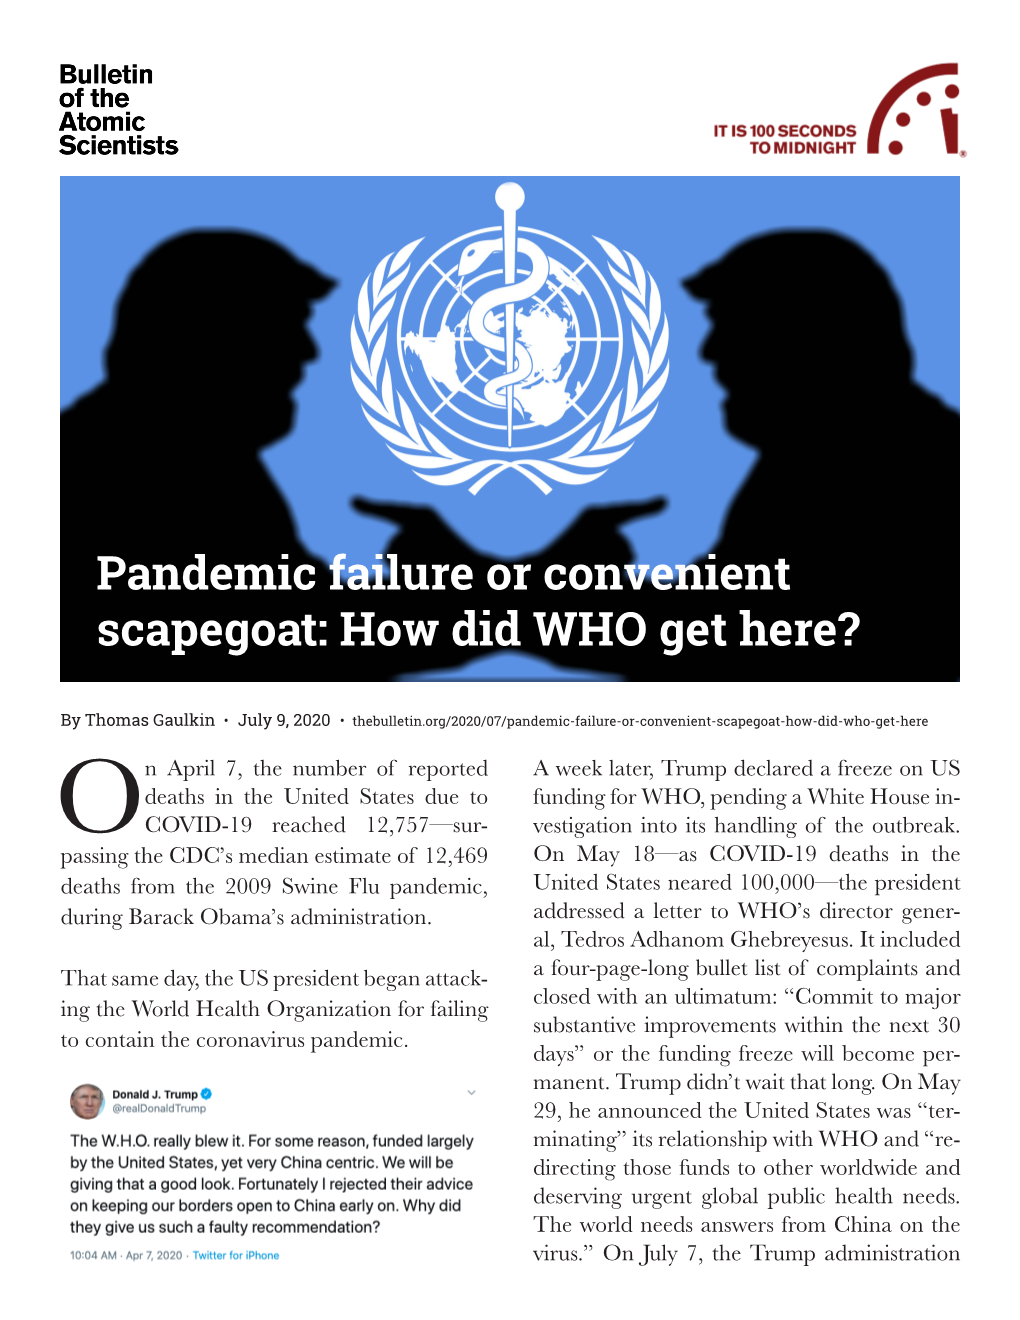 Pandemic Failure Or Convenient Scapegoat: How Did WHO Get Here?